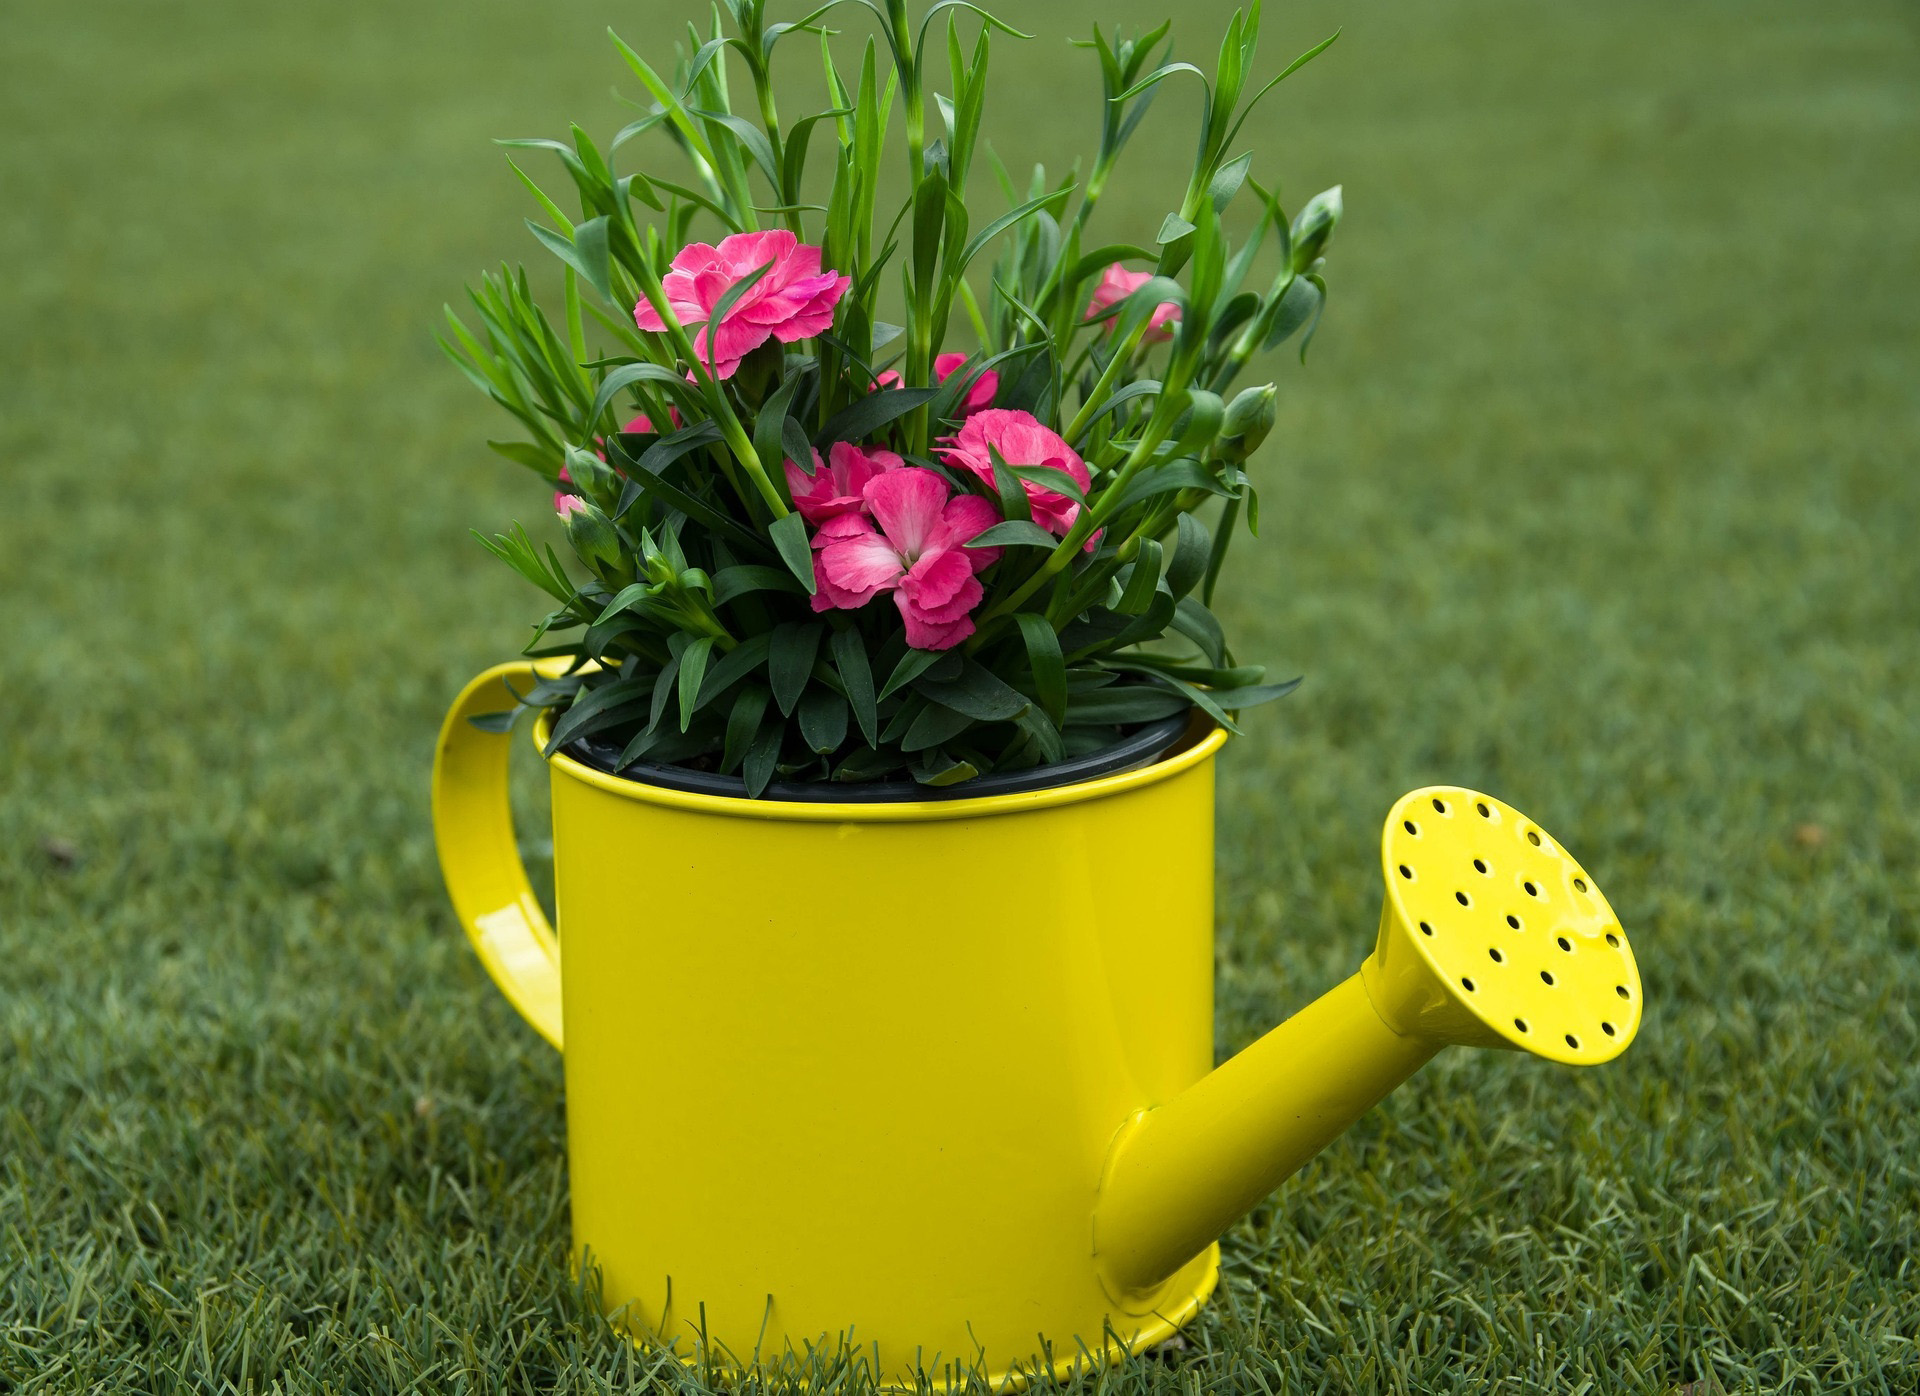 man made, flower, pink flower, watering can